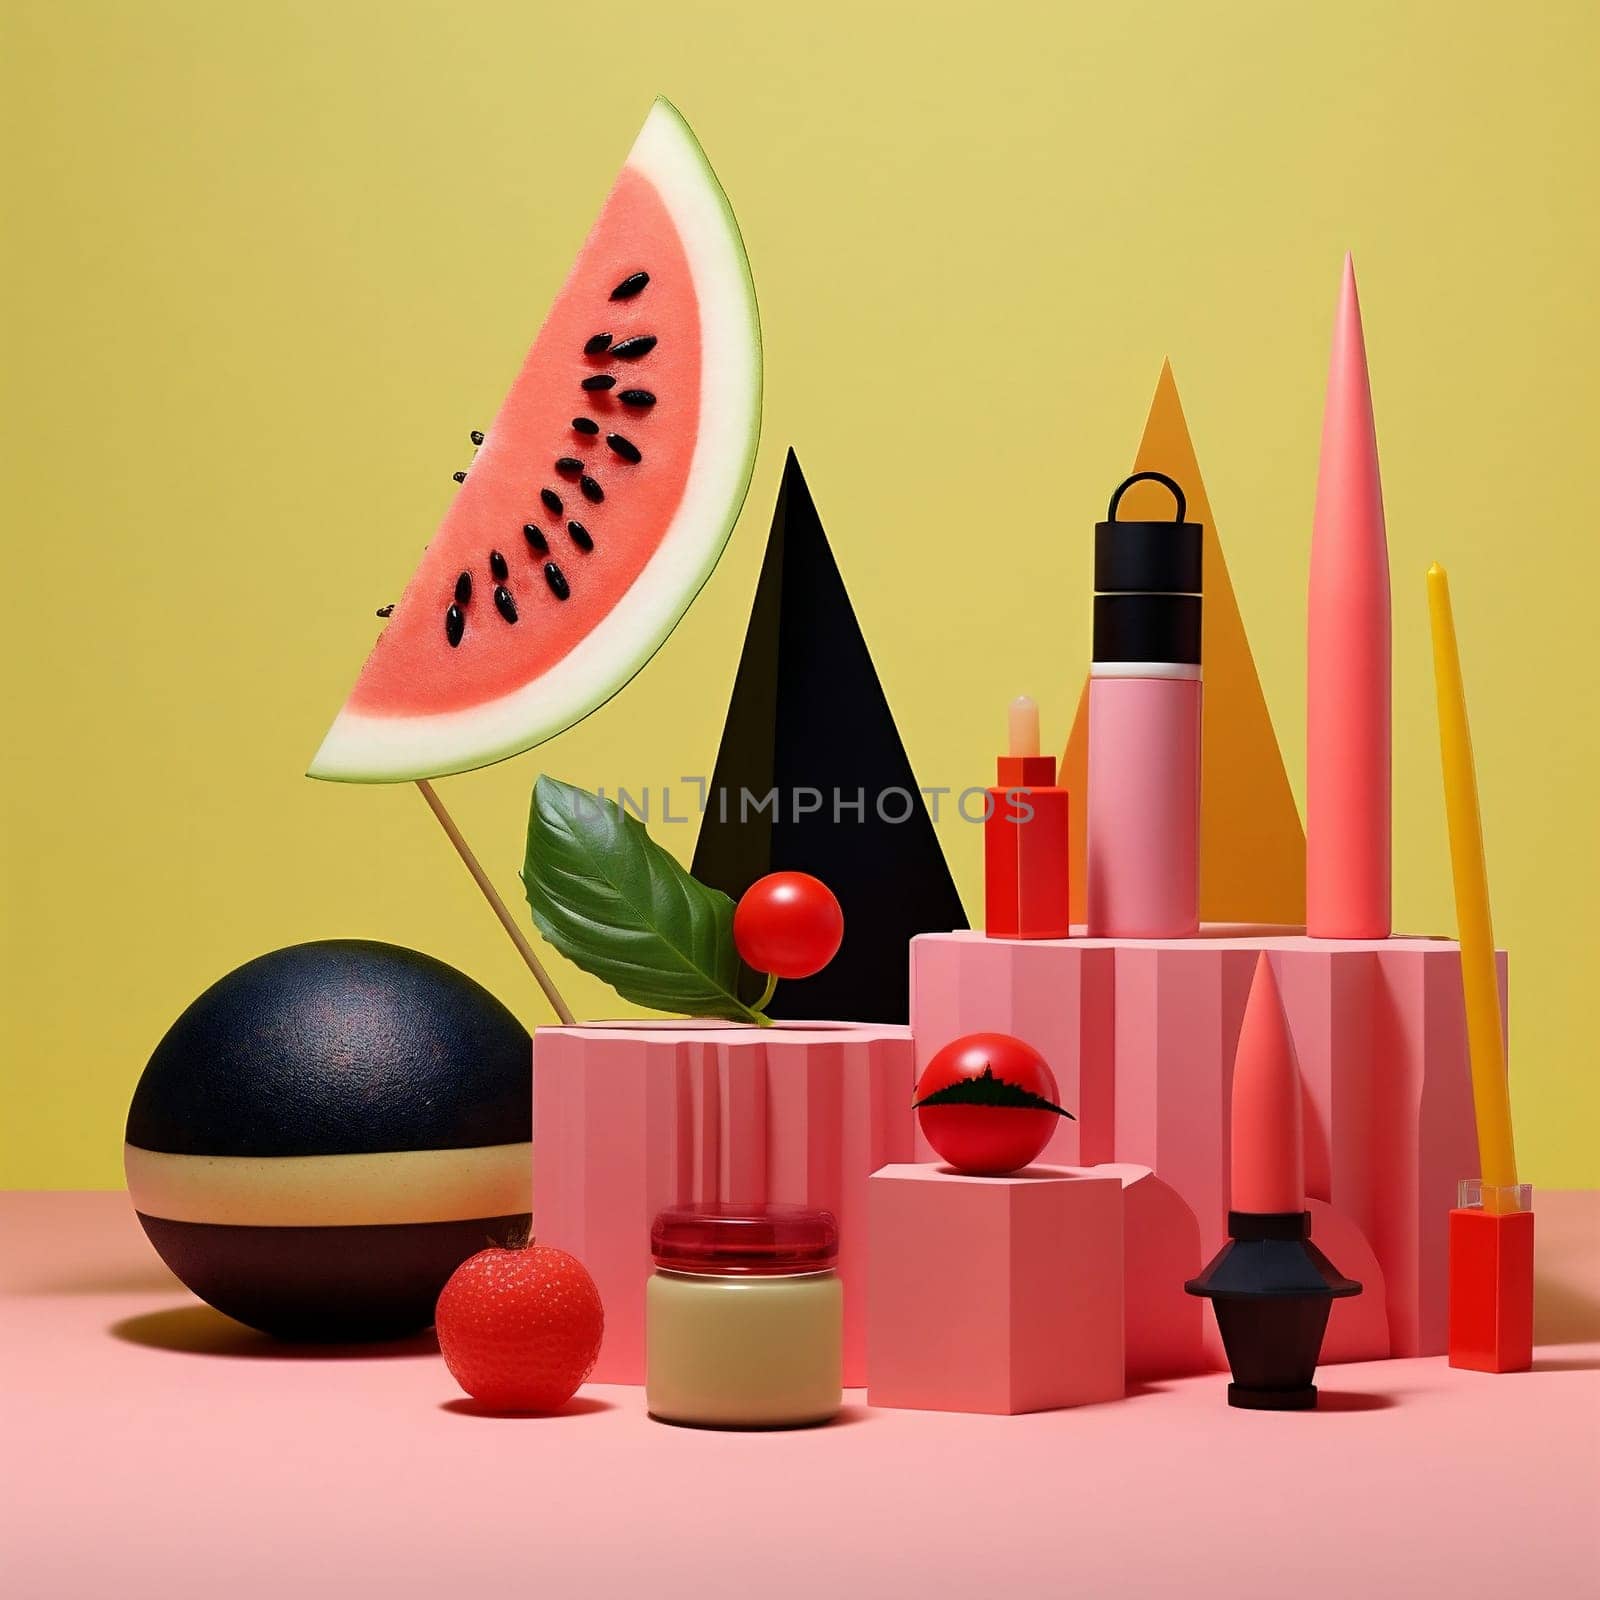 Top exotic lay food view pattern organic composition fresh papaya tasty fruits background sweet tropical creative concept summer juicy yellow diet healthy